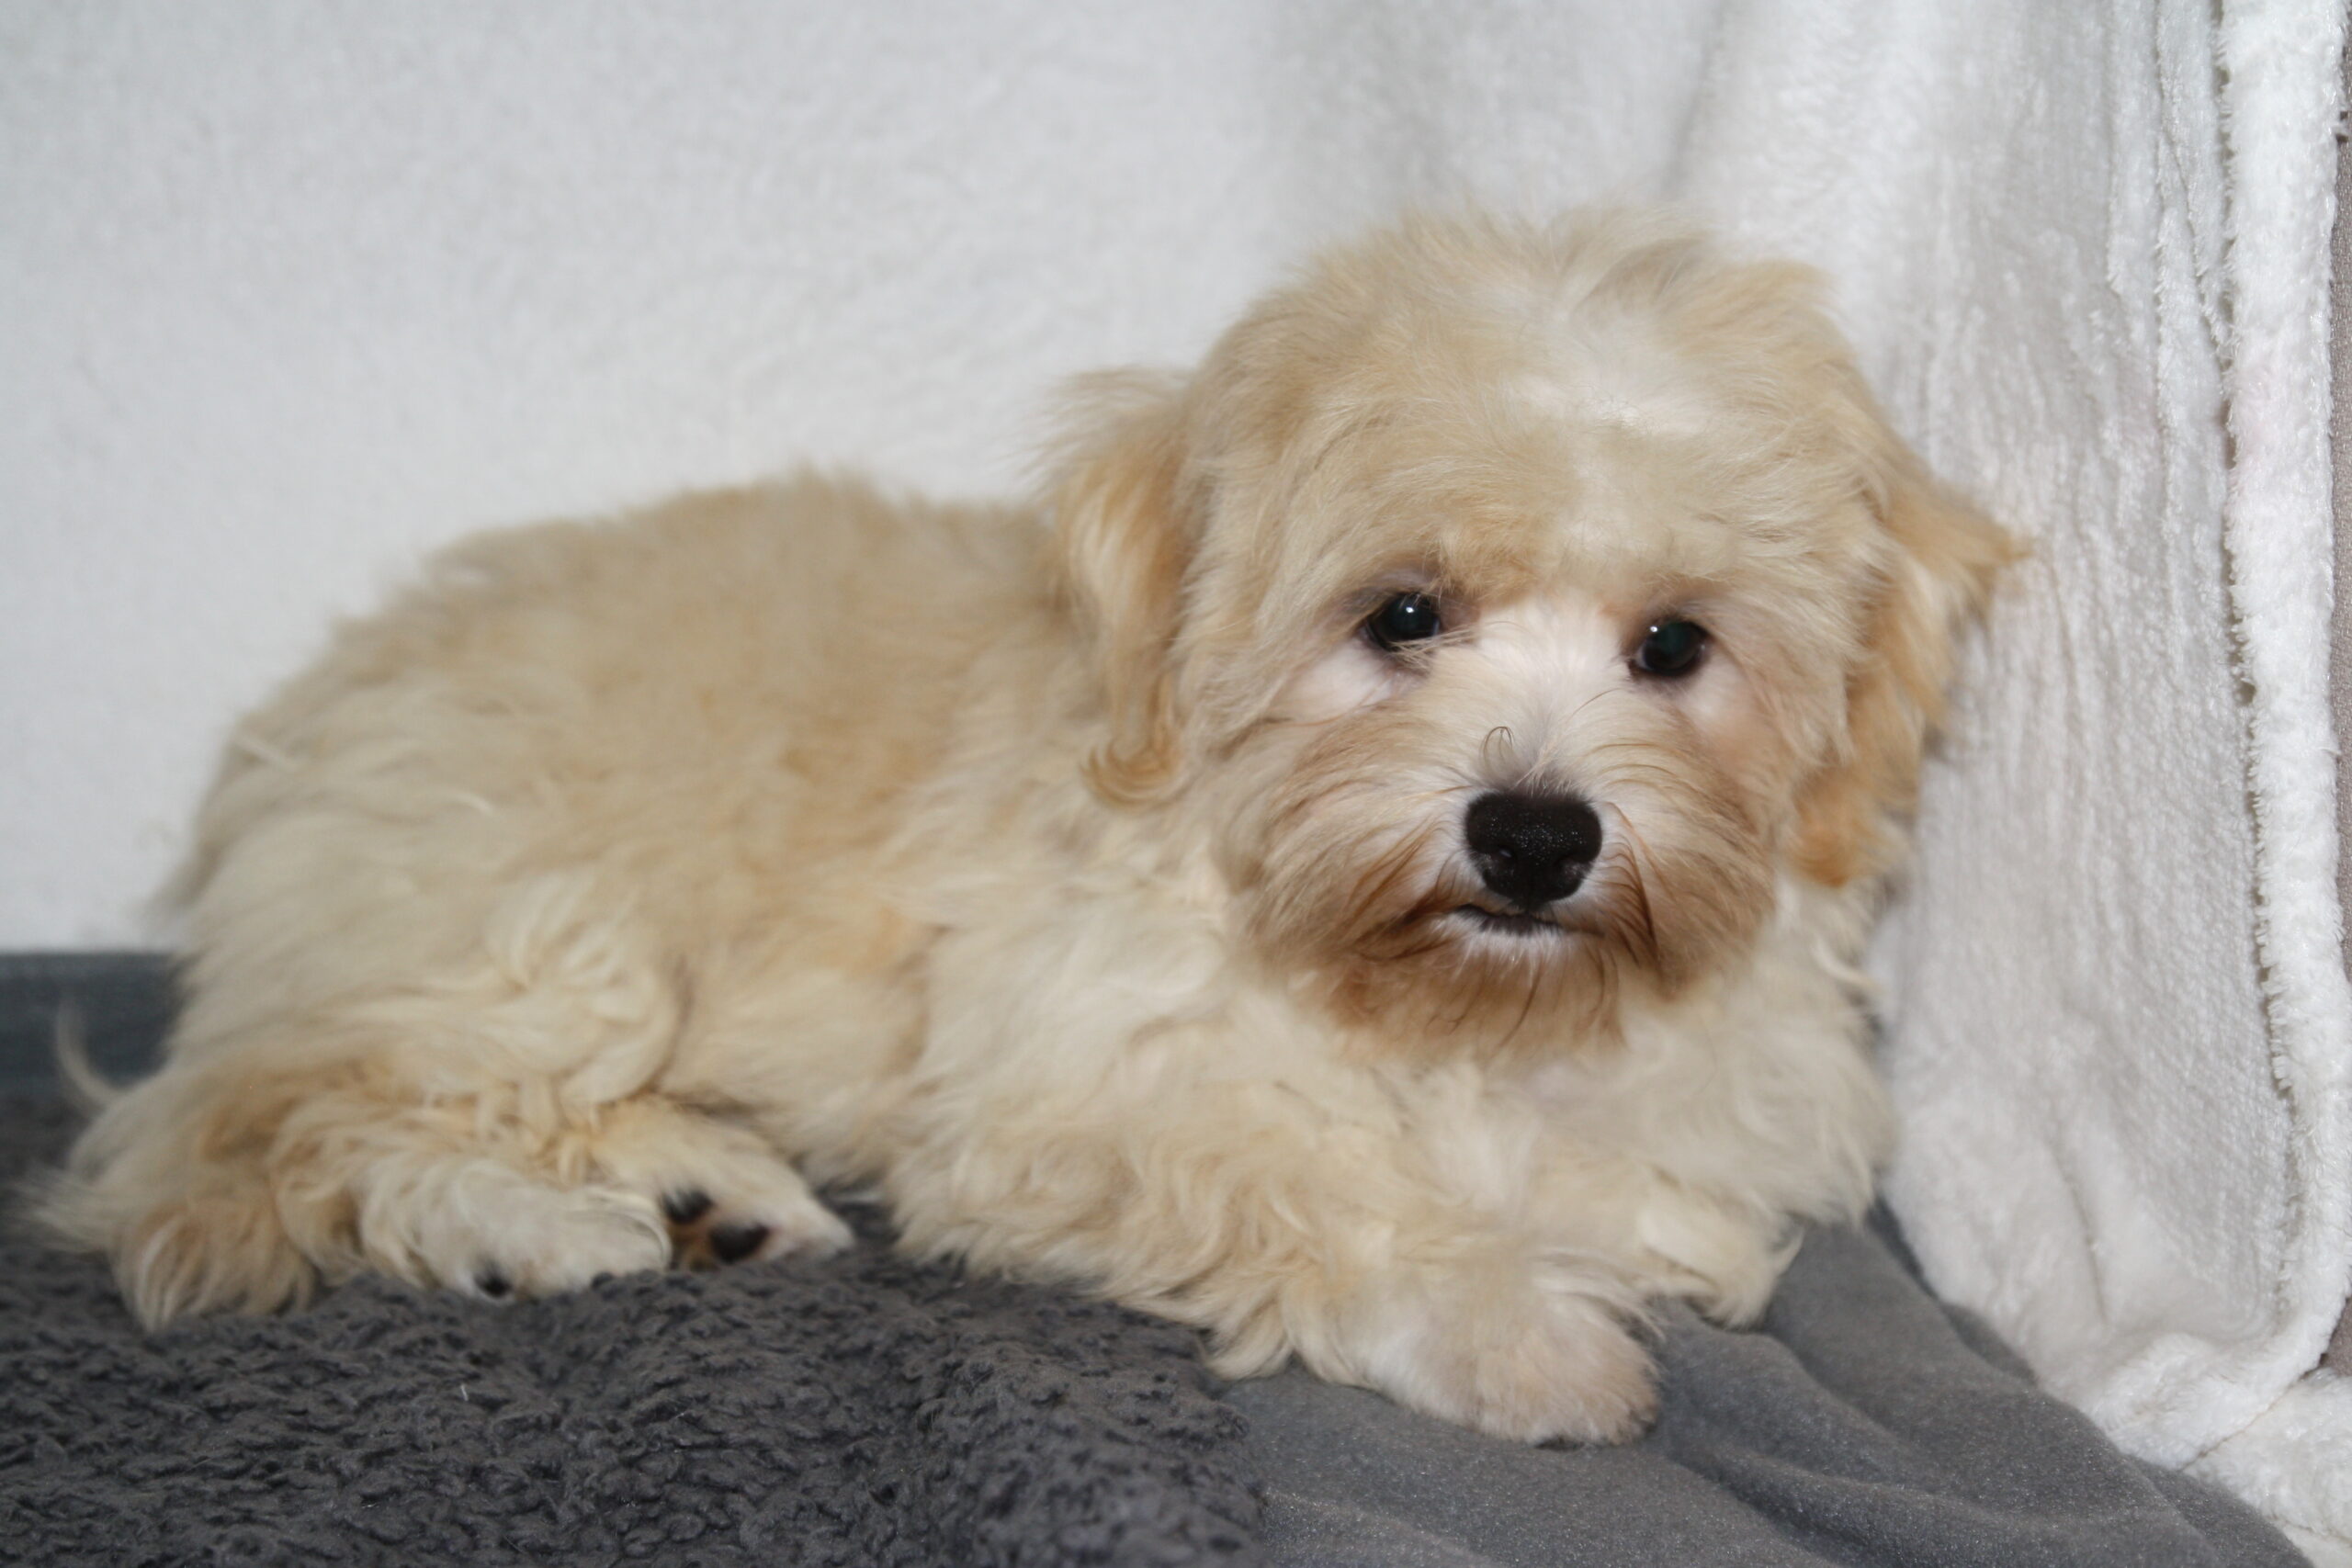 "Teddy"
DOB: 6/7/2022
Breed: Havanese
Sex: Male
Availability: Ready to go home.
Price: $800